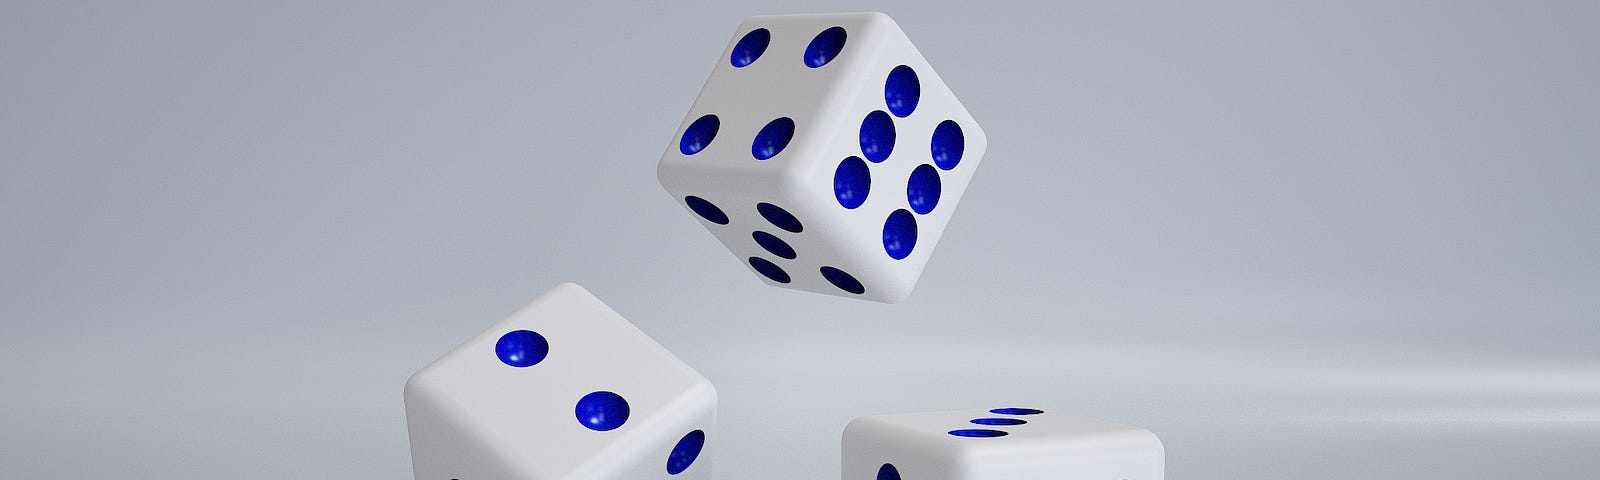 Three dice in various stages of rolling.